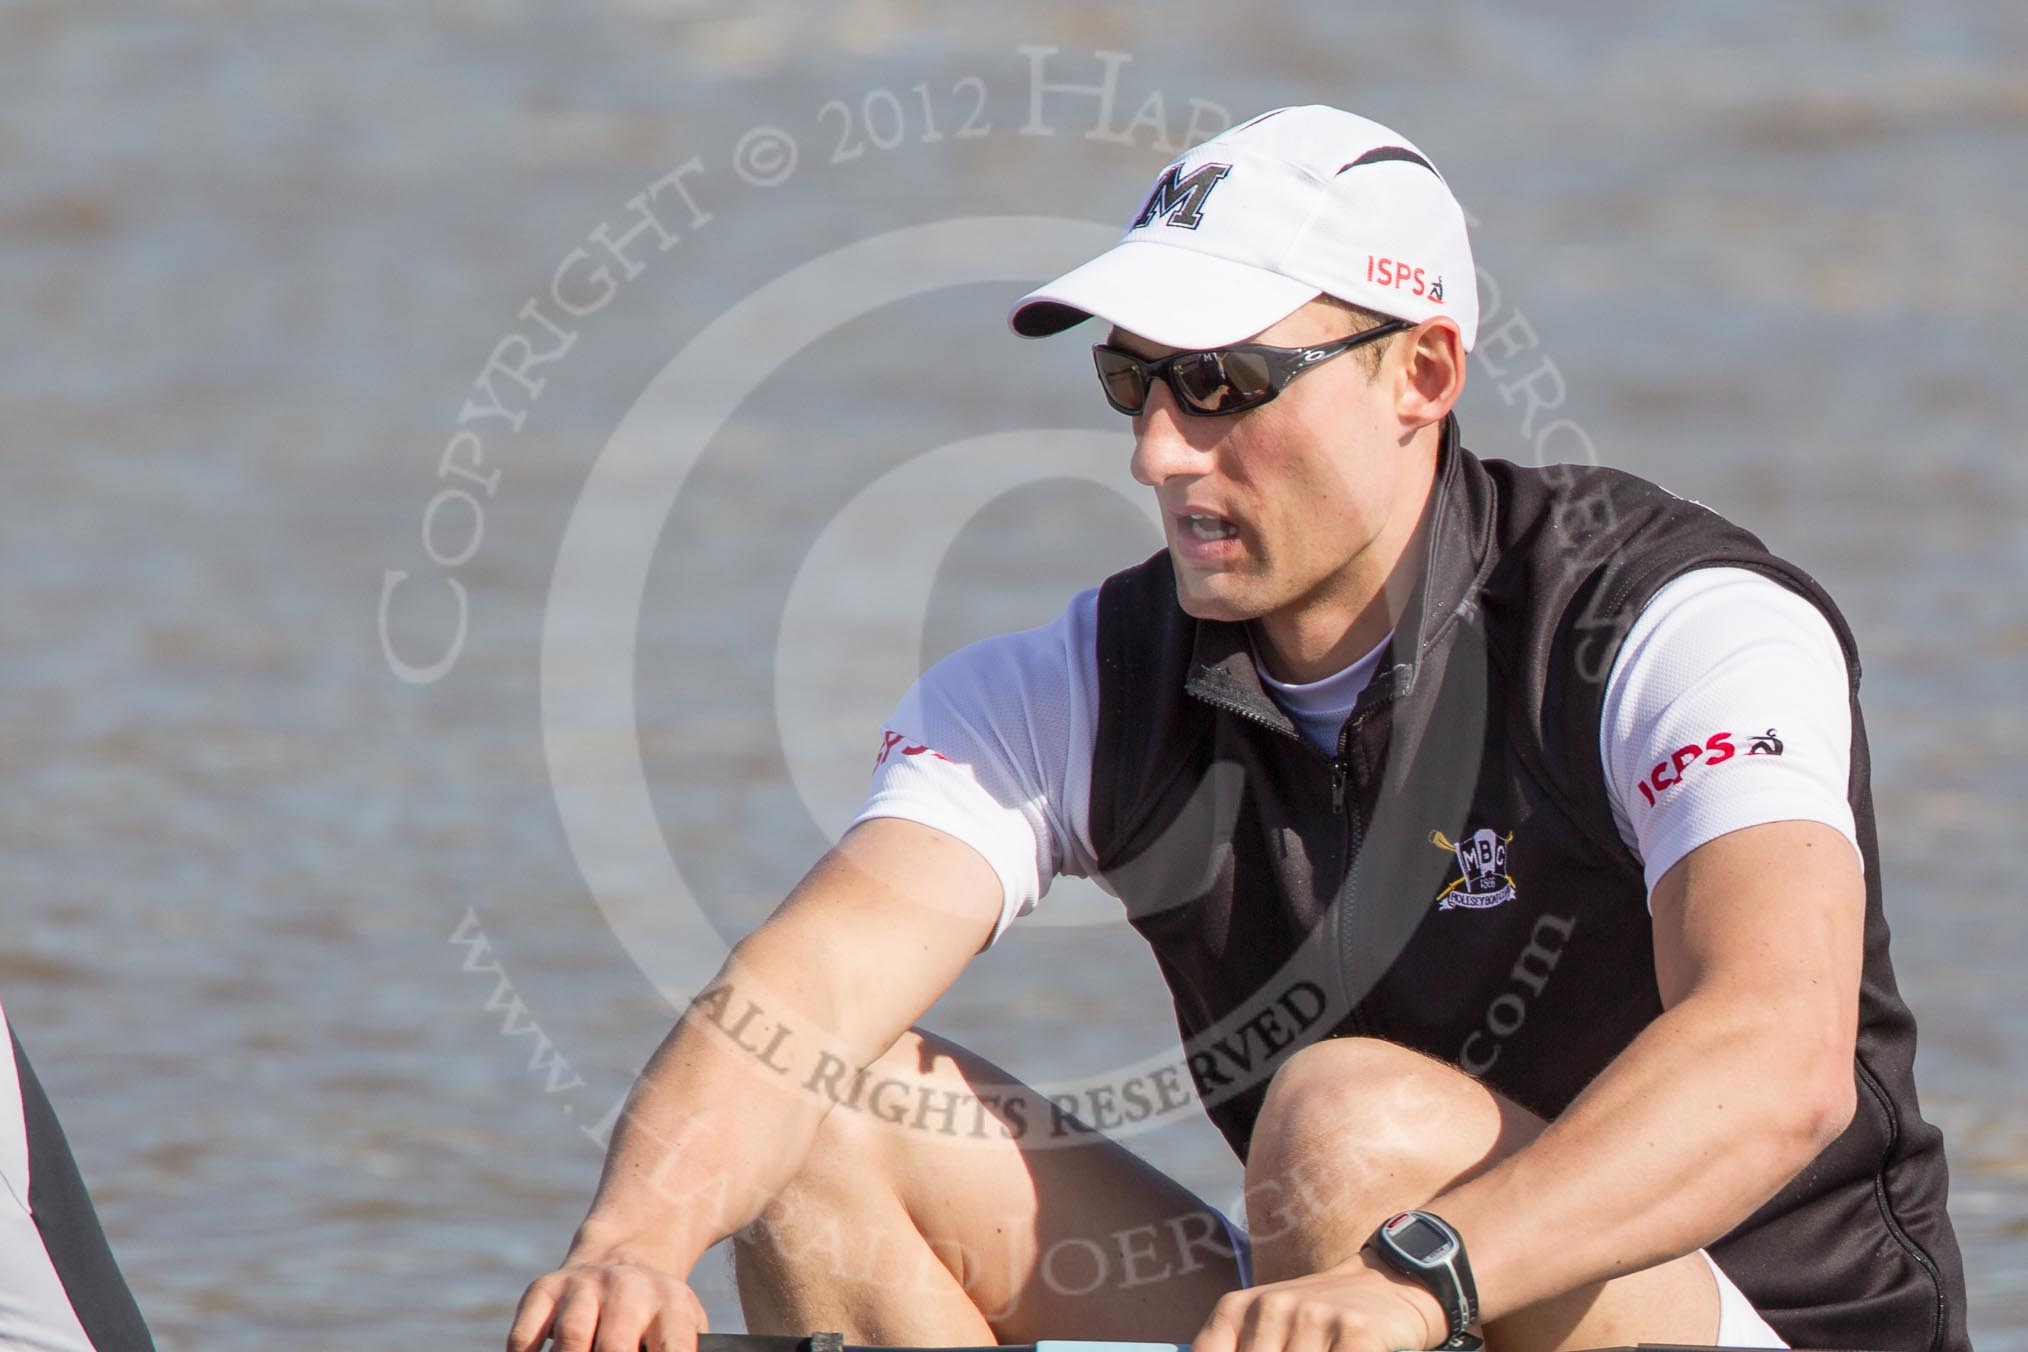 The Boat Race season 2012 - fixture CUBC vs Molesey BC.




on 25 March 2012 at 15:02, image #84